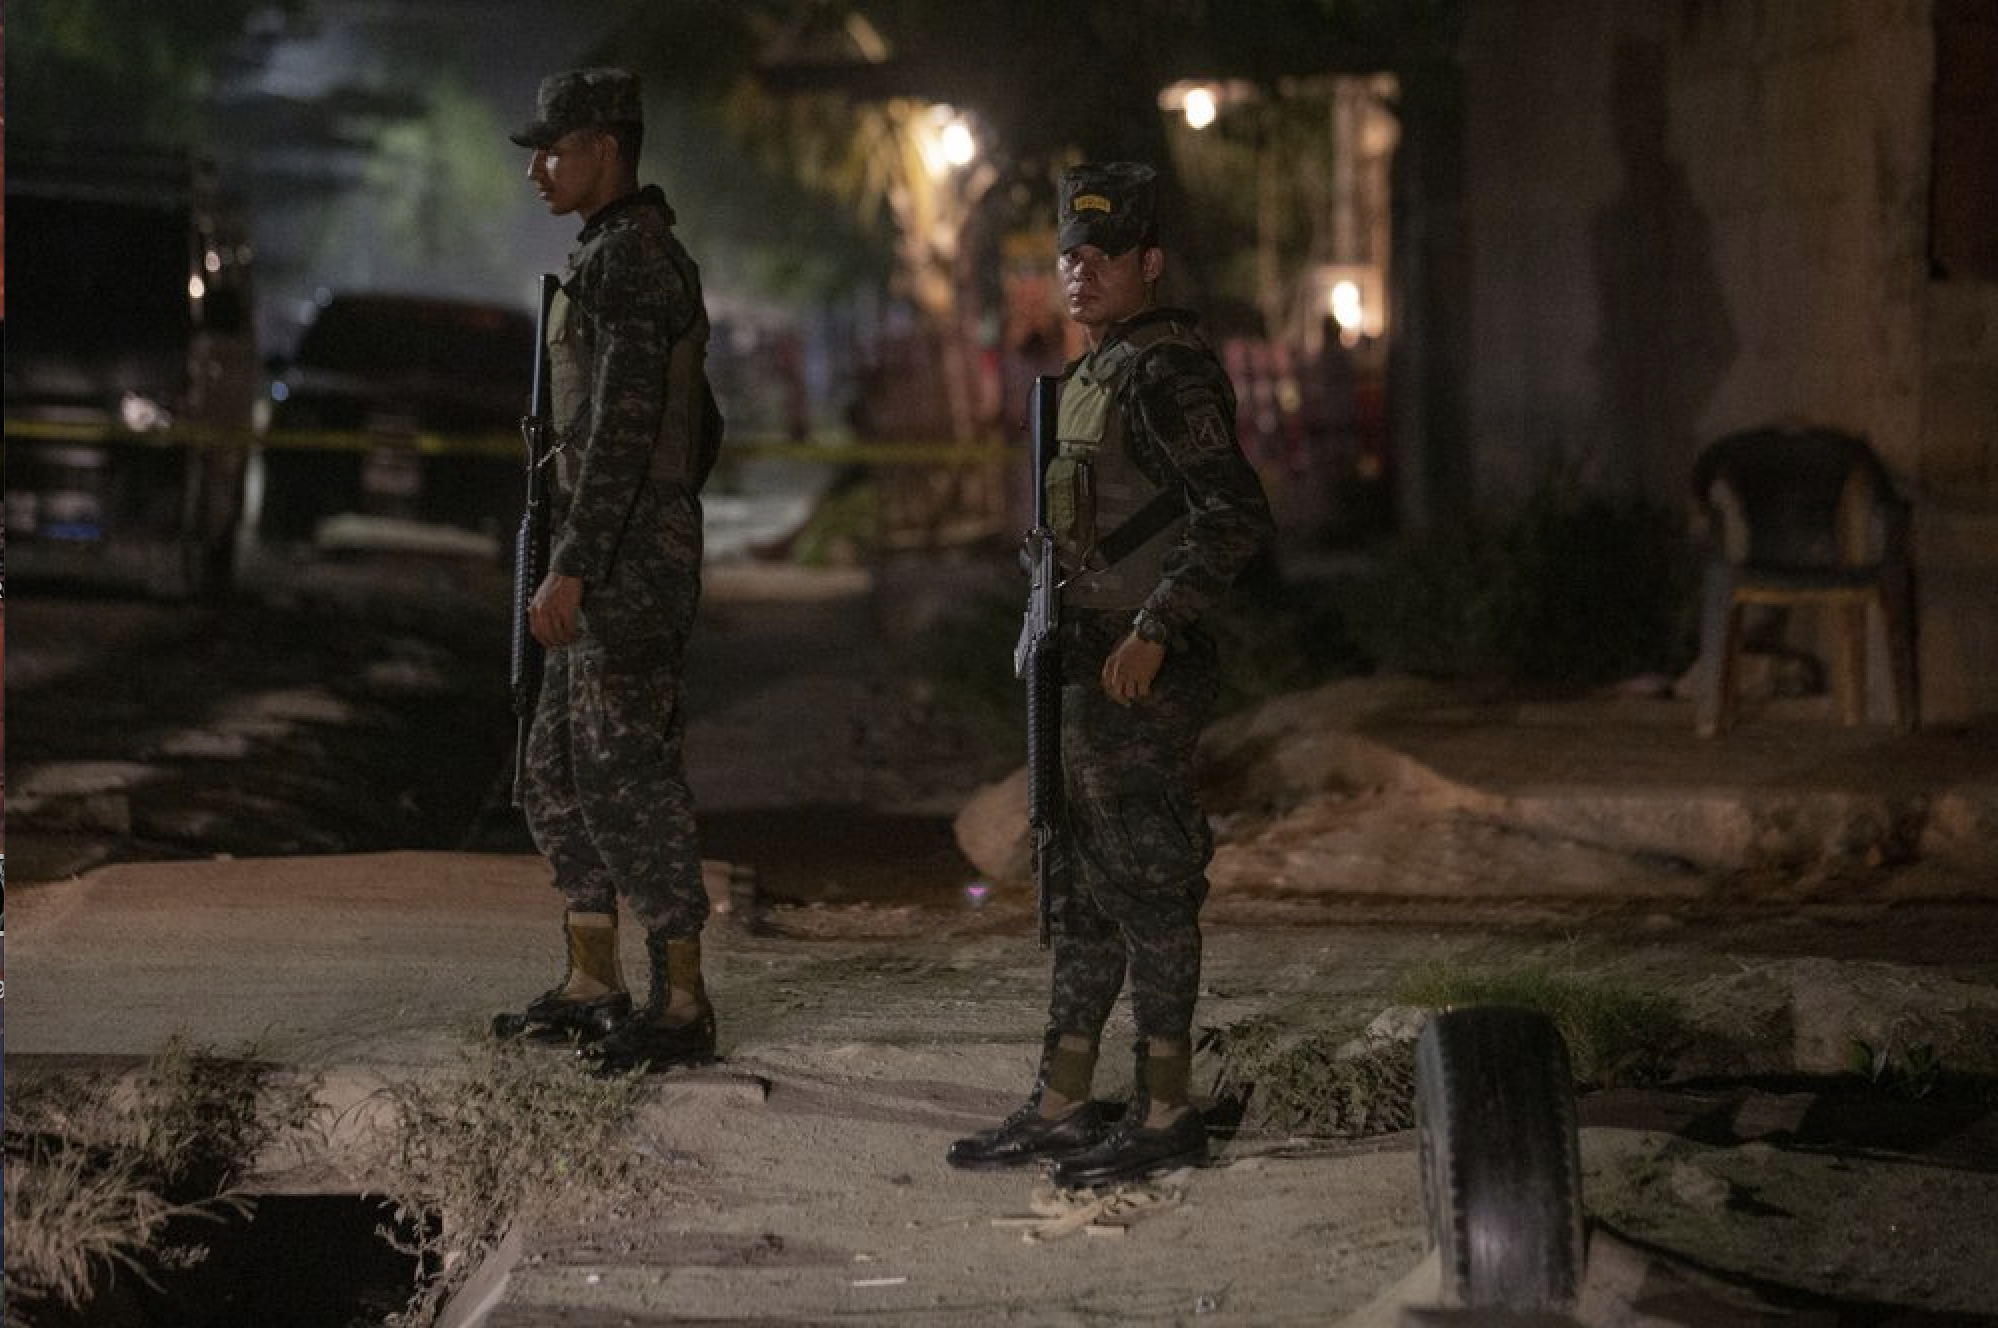 In this Nov. 30, 2019 photo, soldiers stand guard near a crime scene as forensic workers inspect a body in the Rivera Hernandez neighborhood of San Pedro Sula, Honduras. There are police stations in these neighborhoods, but everyone knows who is in charge. The gangs monitor the streets, the police patrols and rival gangs using a complex network of young boys who work in shifts around the clock and report anything suspicious. Image by Moises Castillo/ AP Photo. Honduras, 2019.